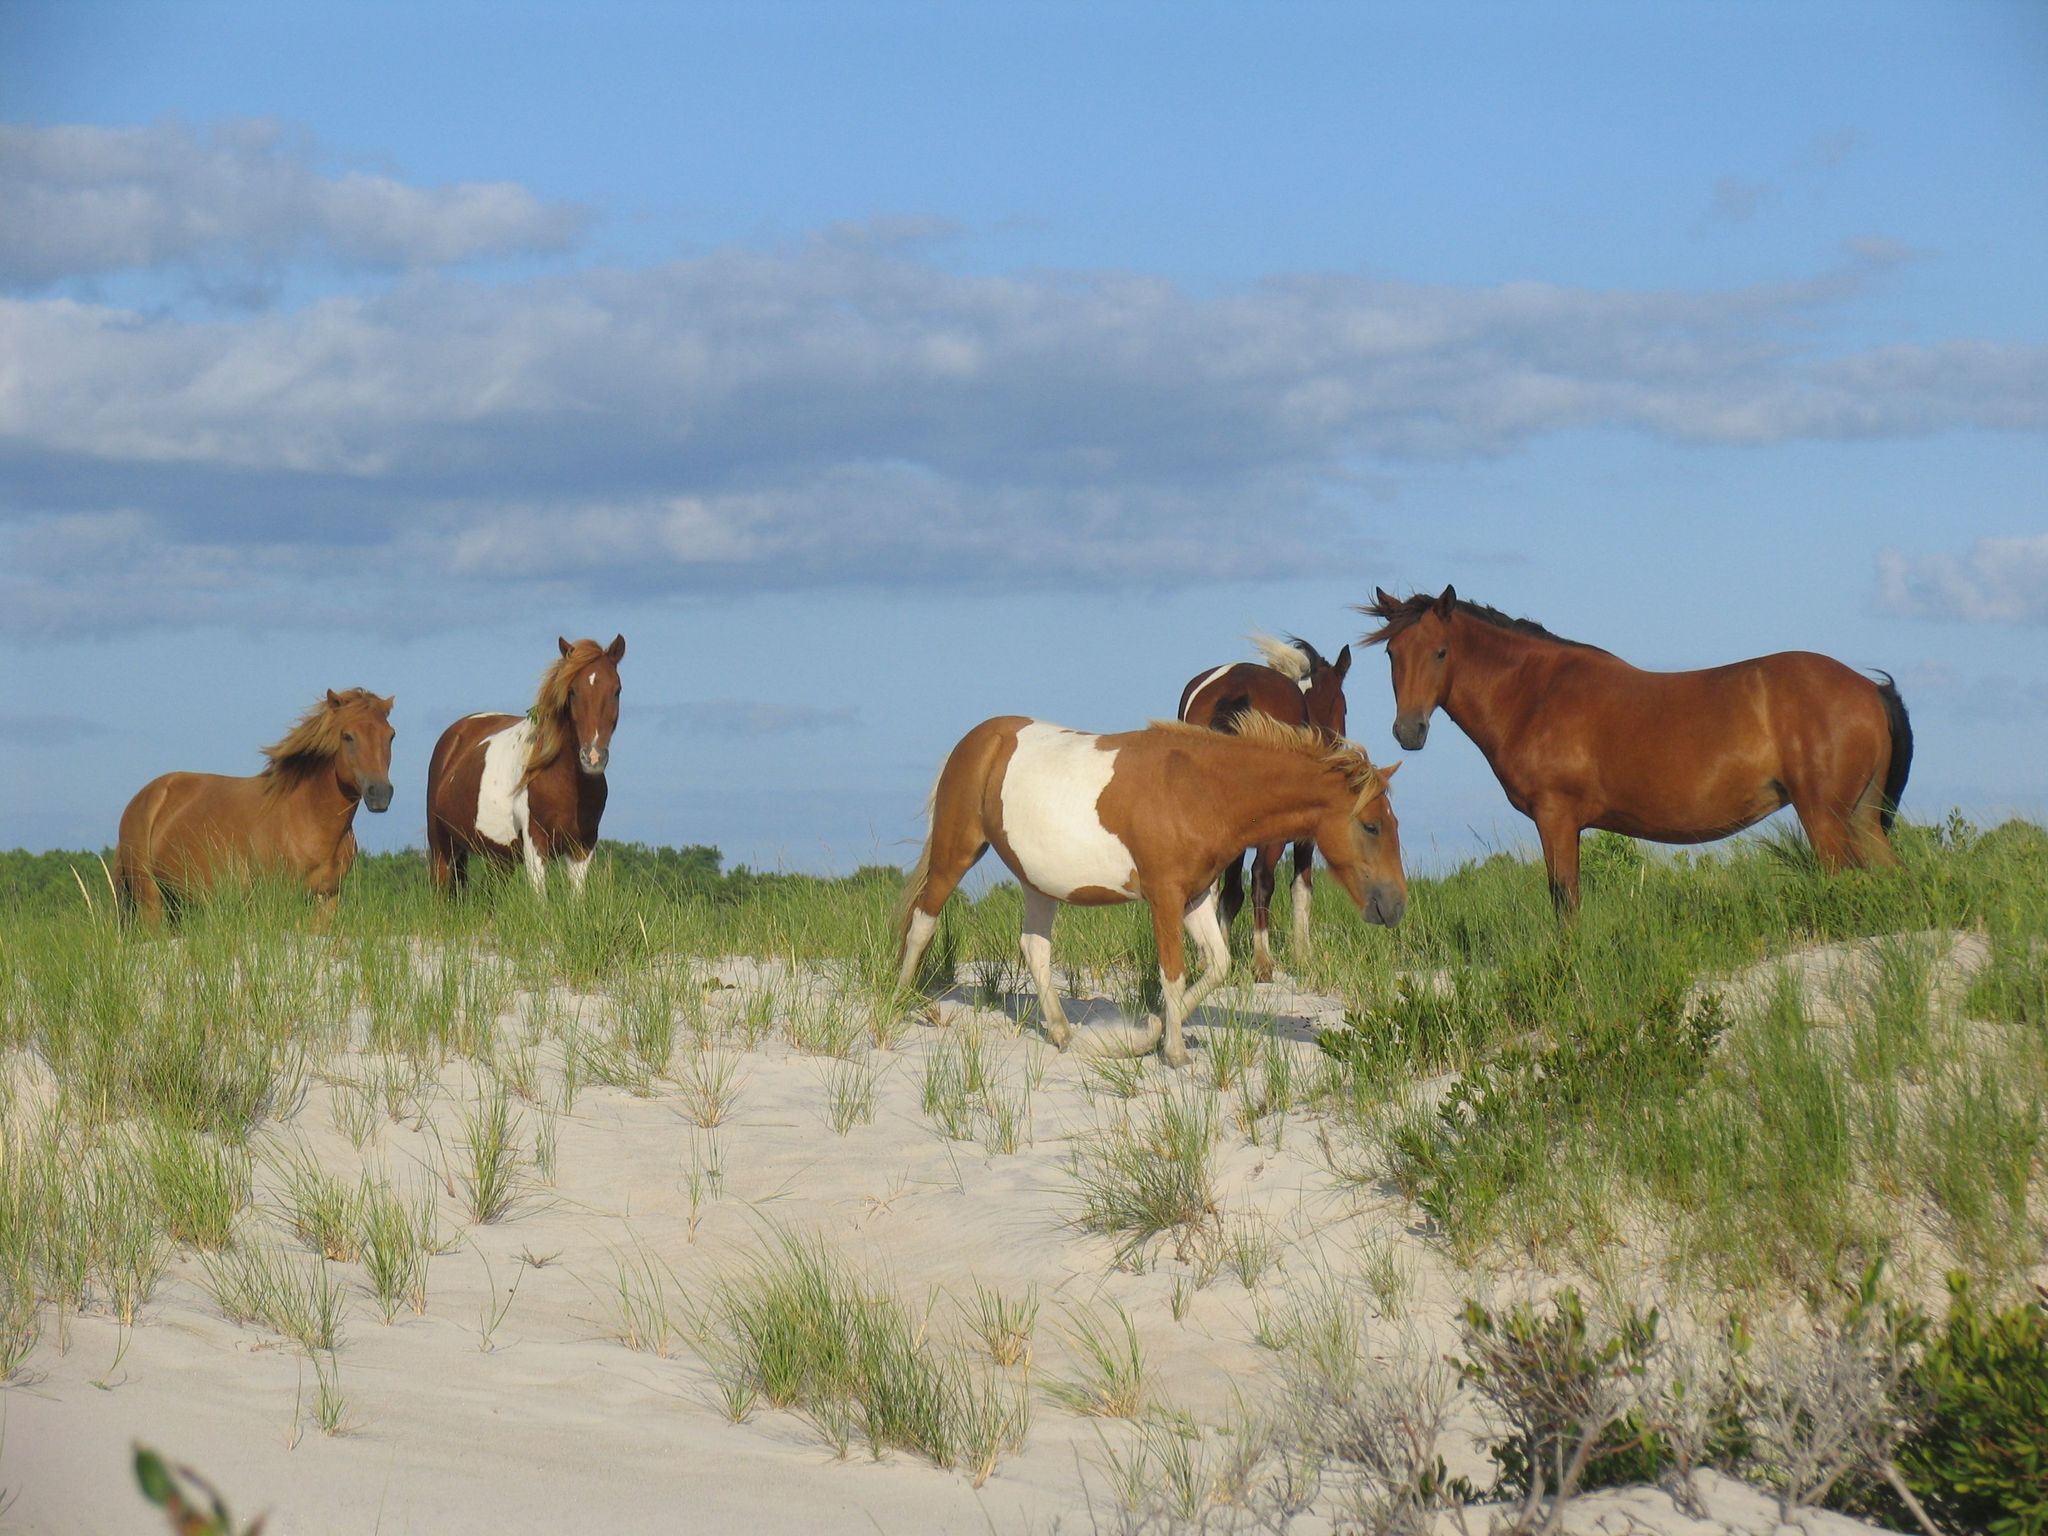 There are few places in the United States where you can view wild horses.Take advantage of the opportunity to view these horses in a natural habitat.